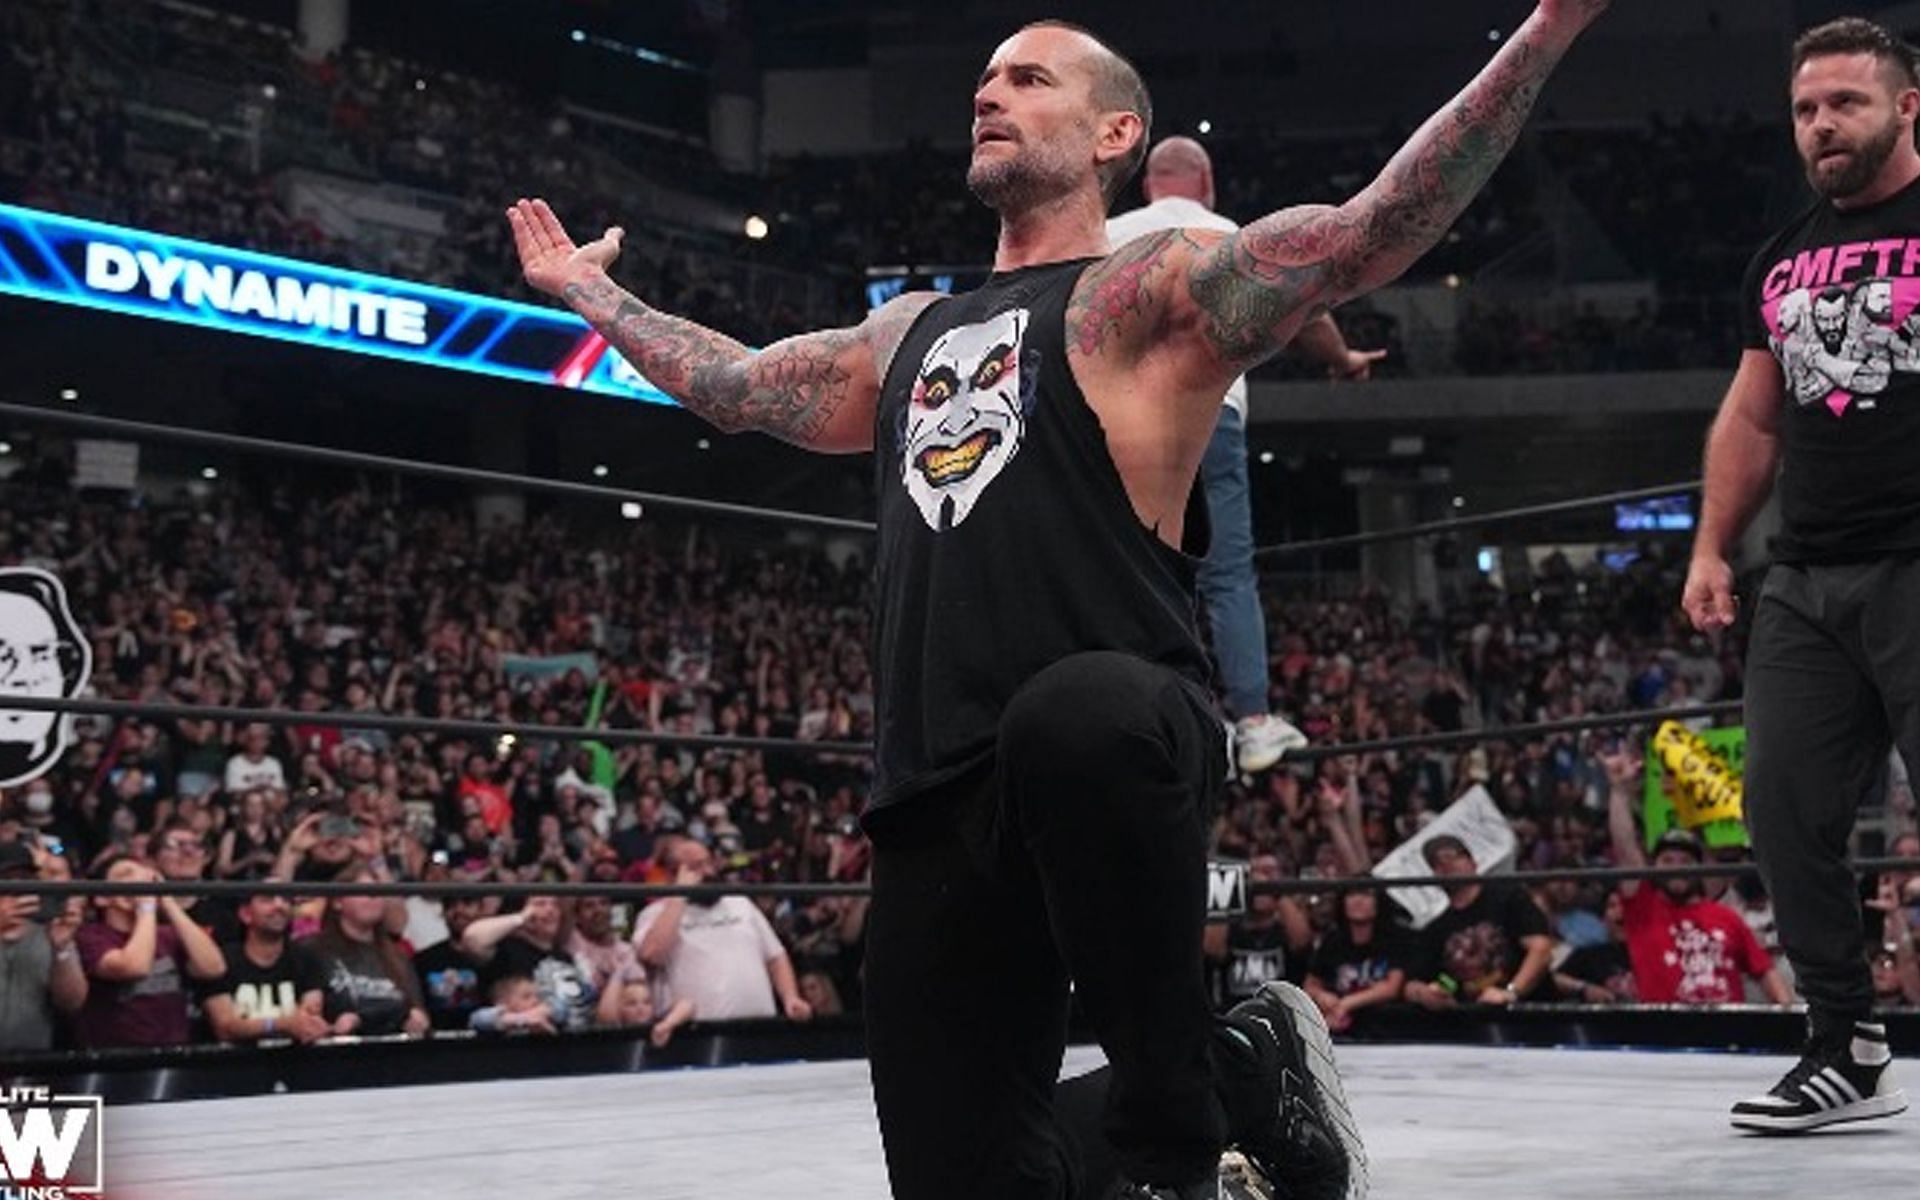 CM Punk delivered a powerful message after making a comeback to the ring